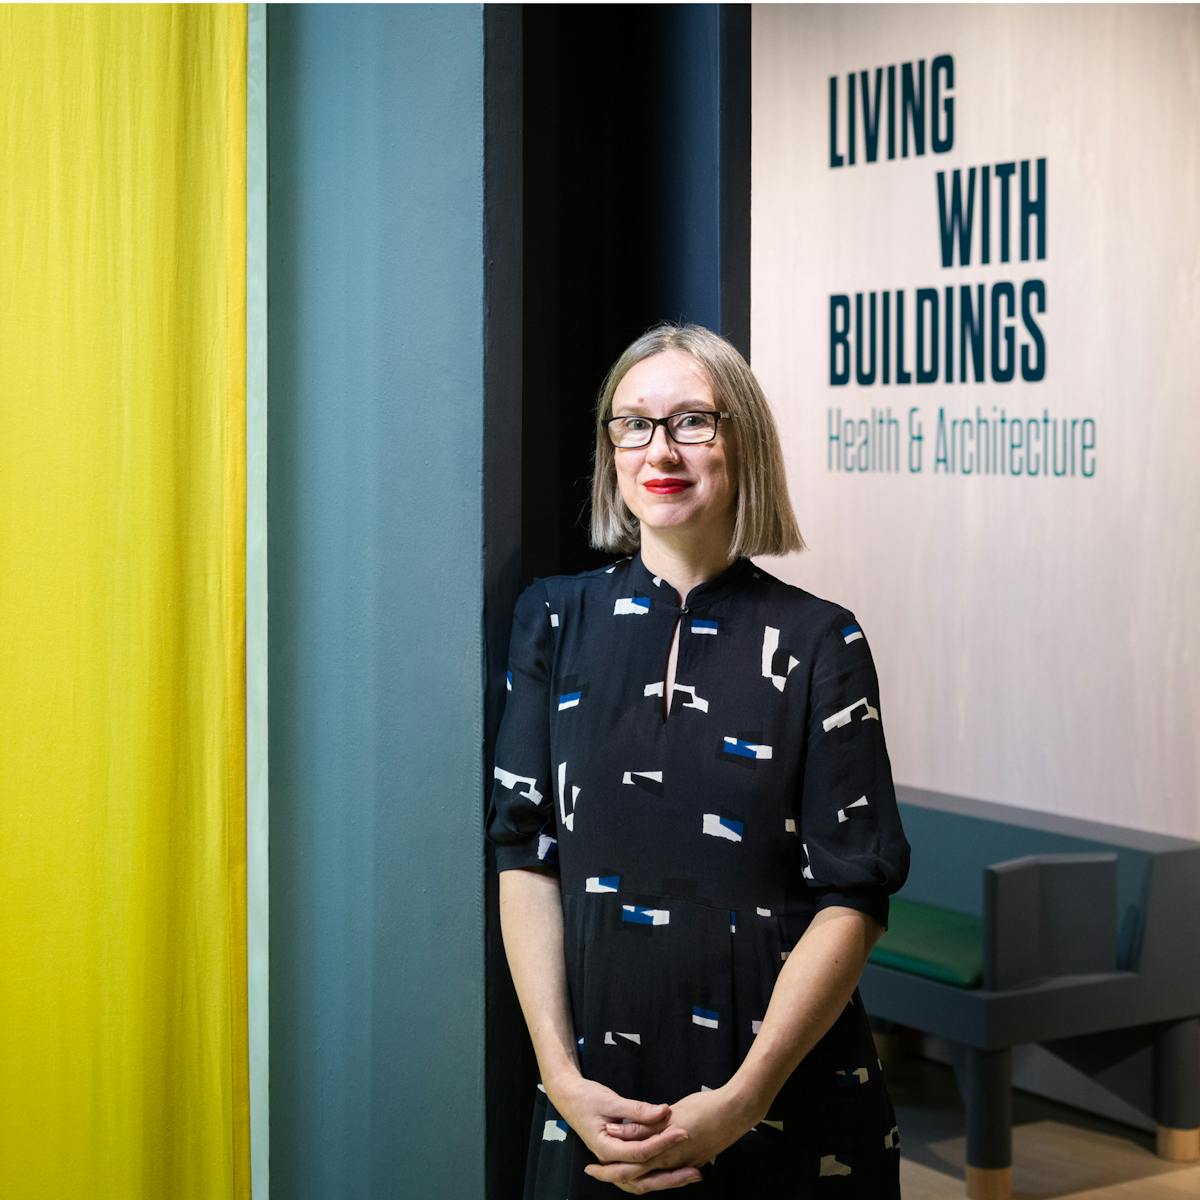 Photographic portrait of Emily Sargent, curator of the exhibition Living with Buildings at Wellcome Collection. Emily is leaning against a pillar within the exhibition space, with a hanging yellow drape to the left and the title of the exhibition to the right.